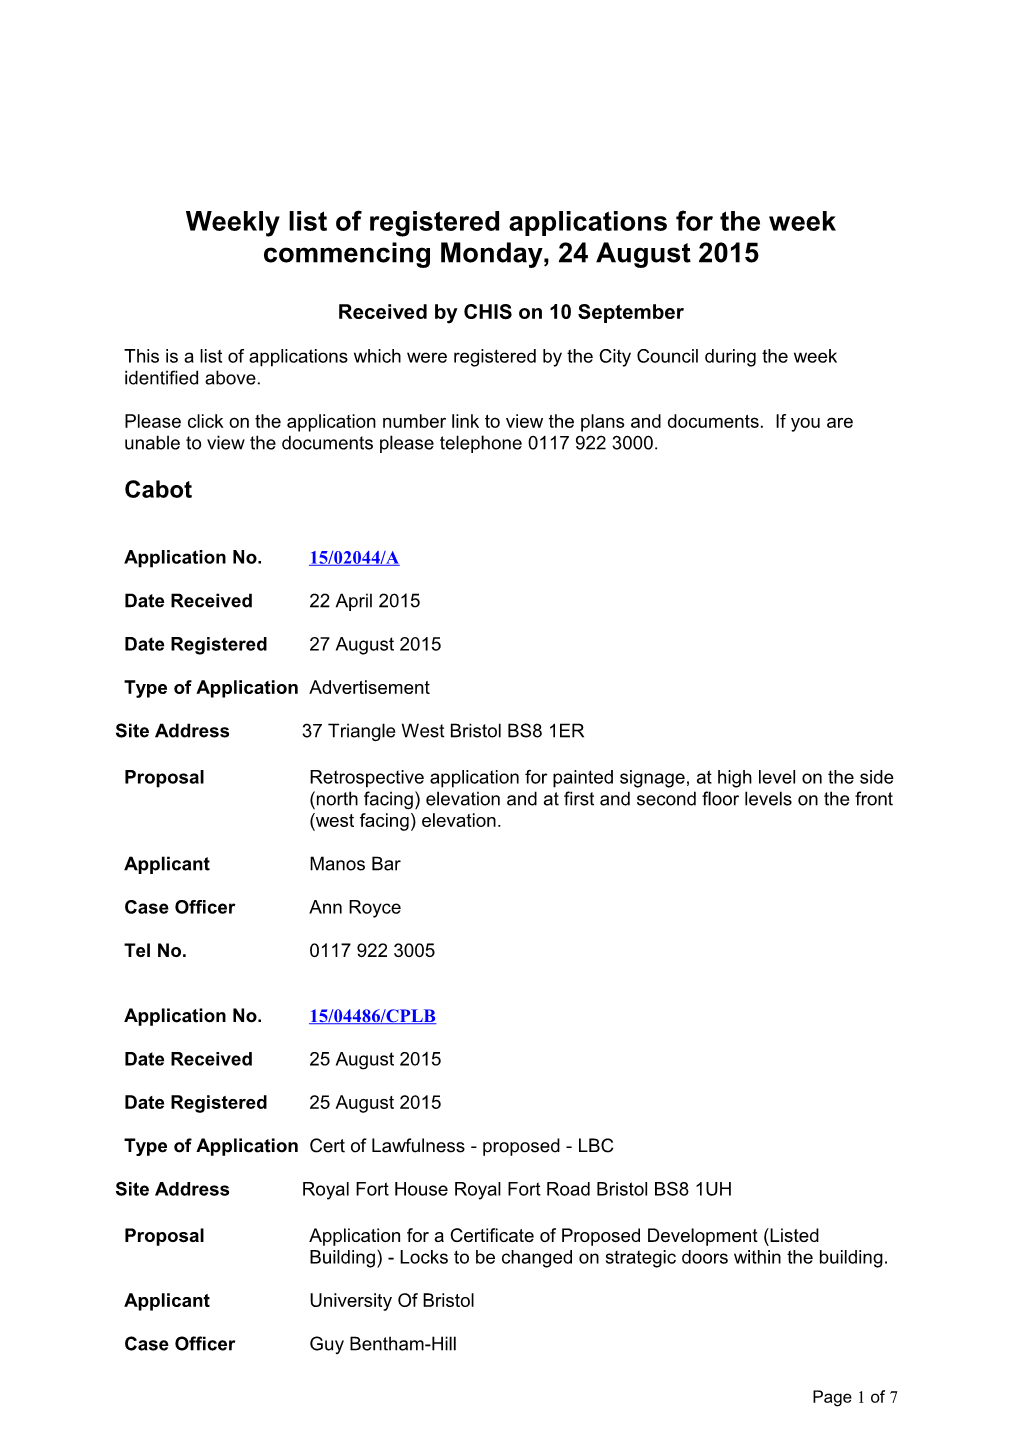 Weekly List of Registered Applications for the Week Commencing Monday, 24 August 2015